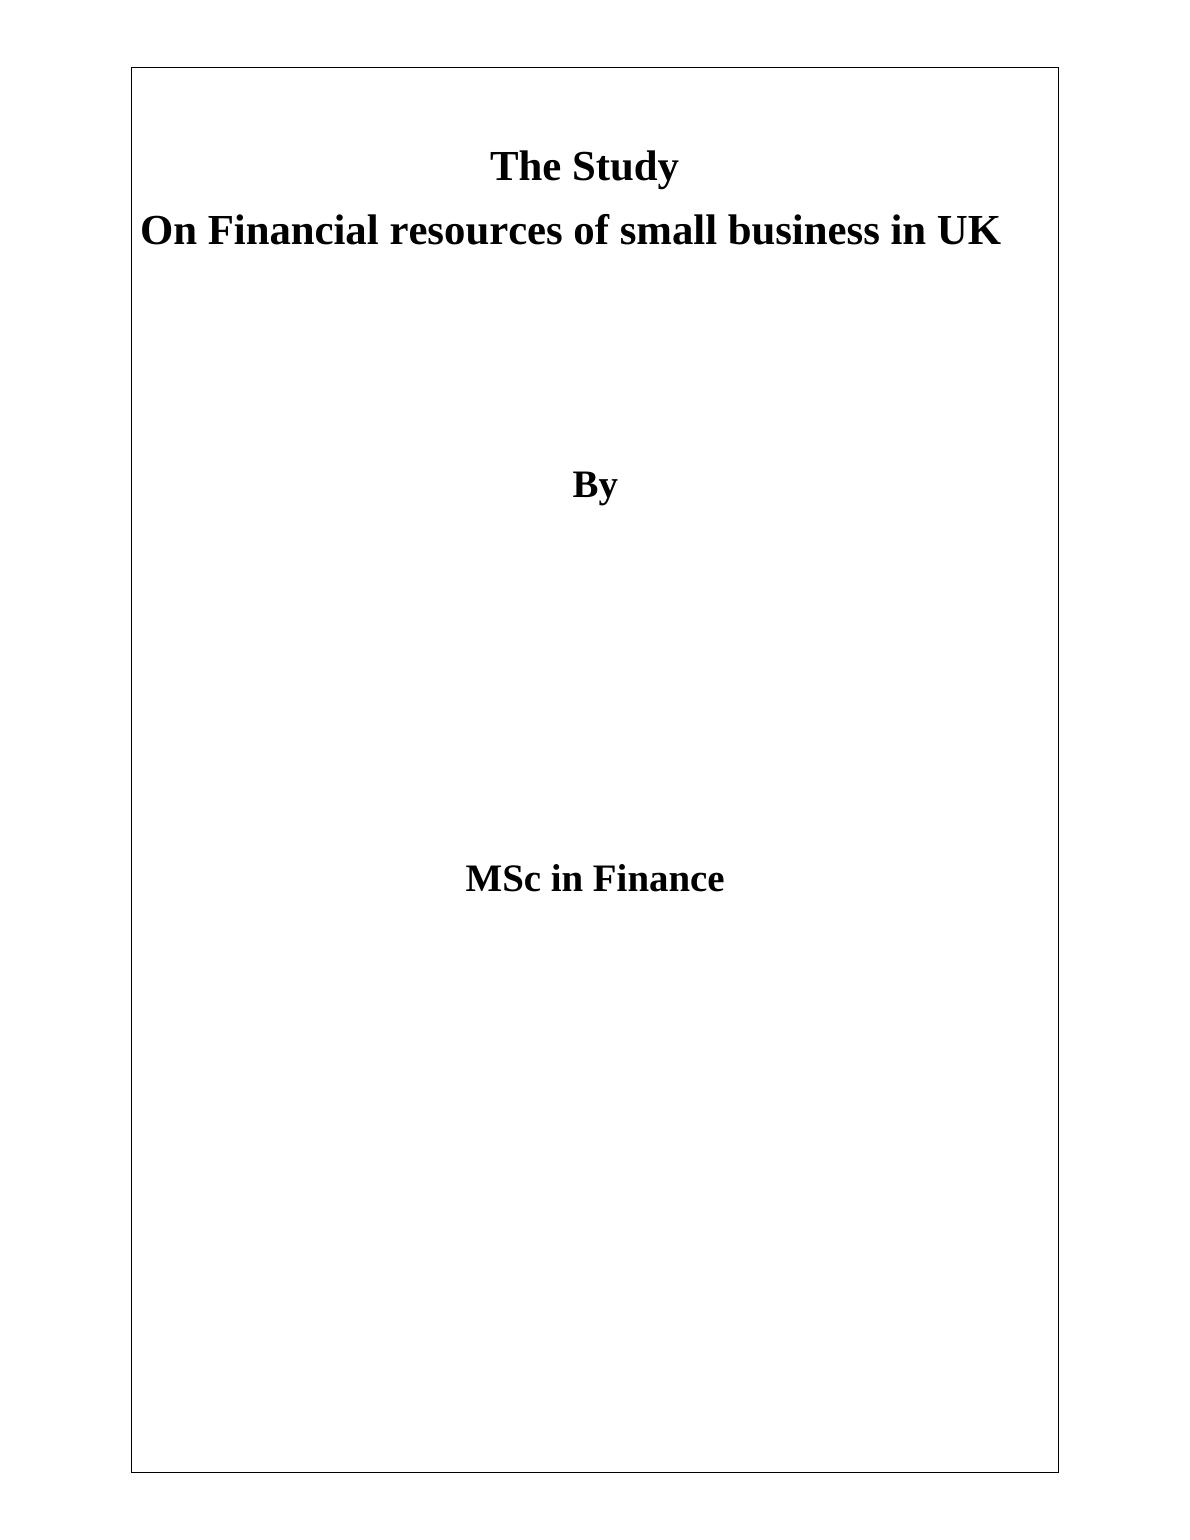 Study On Financial Resources of Small Business in UK By MSc in Finance The Study On Financial Resources of Small Business in UK_1